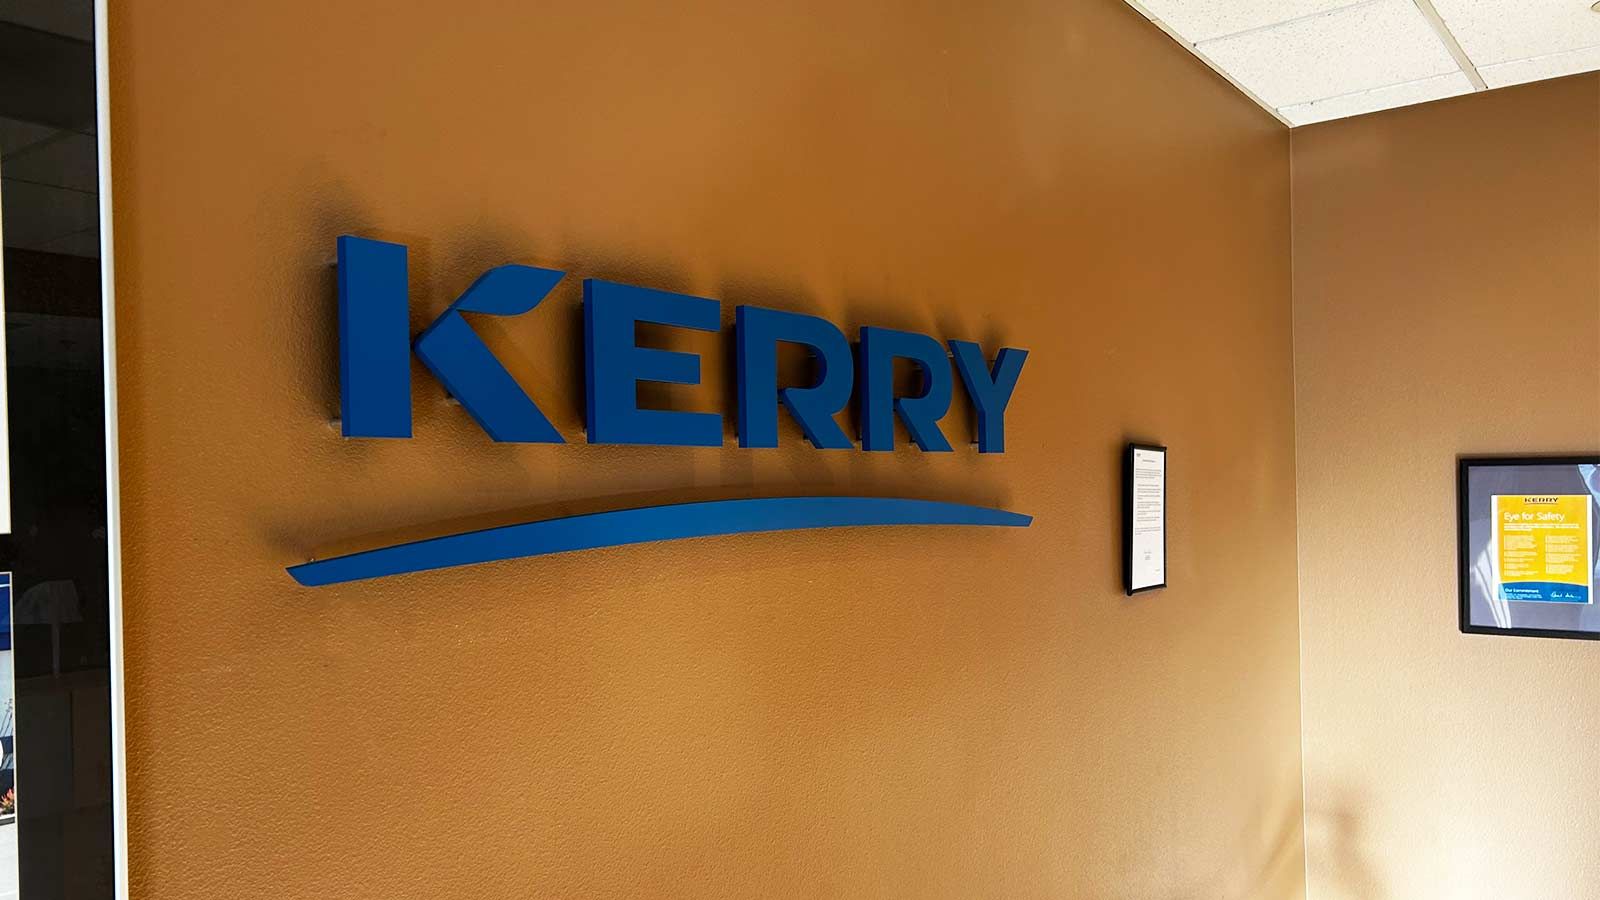 Kerry custom letter sign mounted on the wall